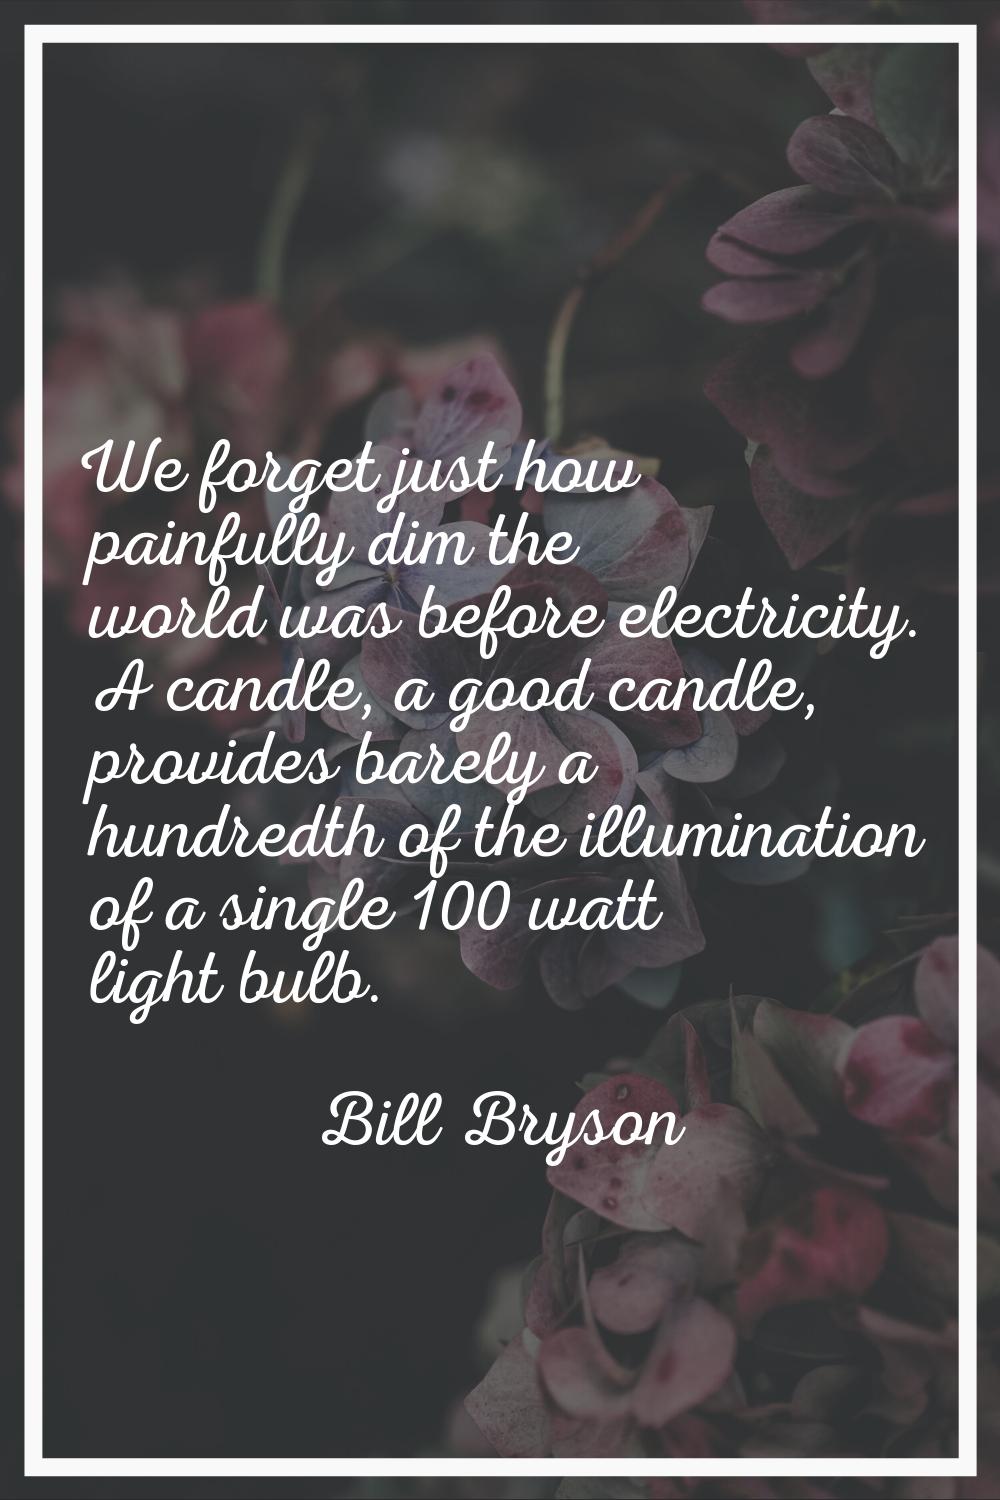 We forget just how painfully dim the world was before electricity. A candle, a good candle, provide